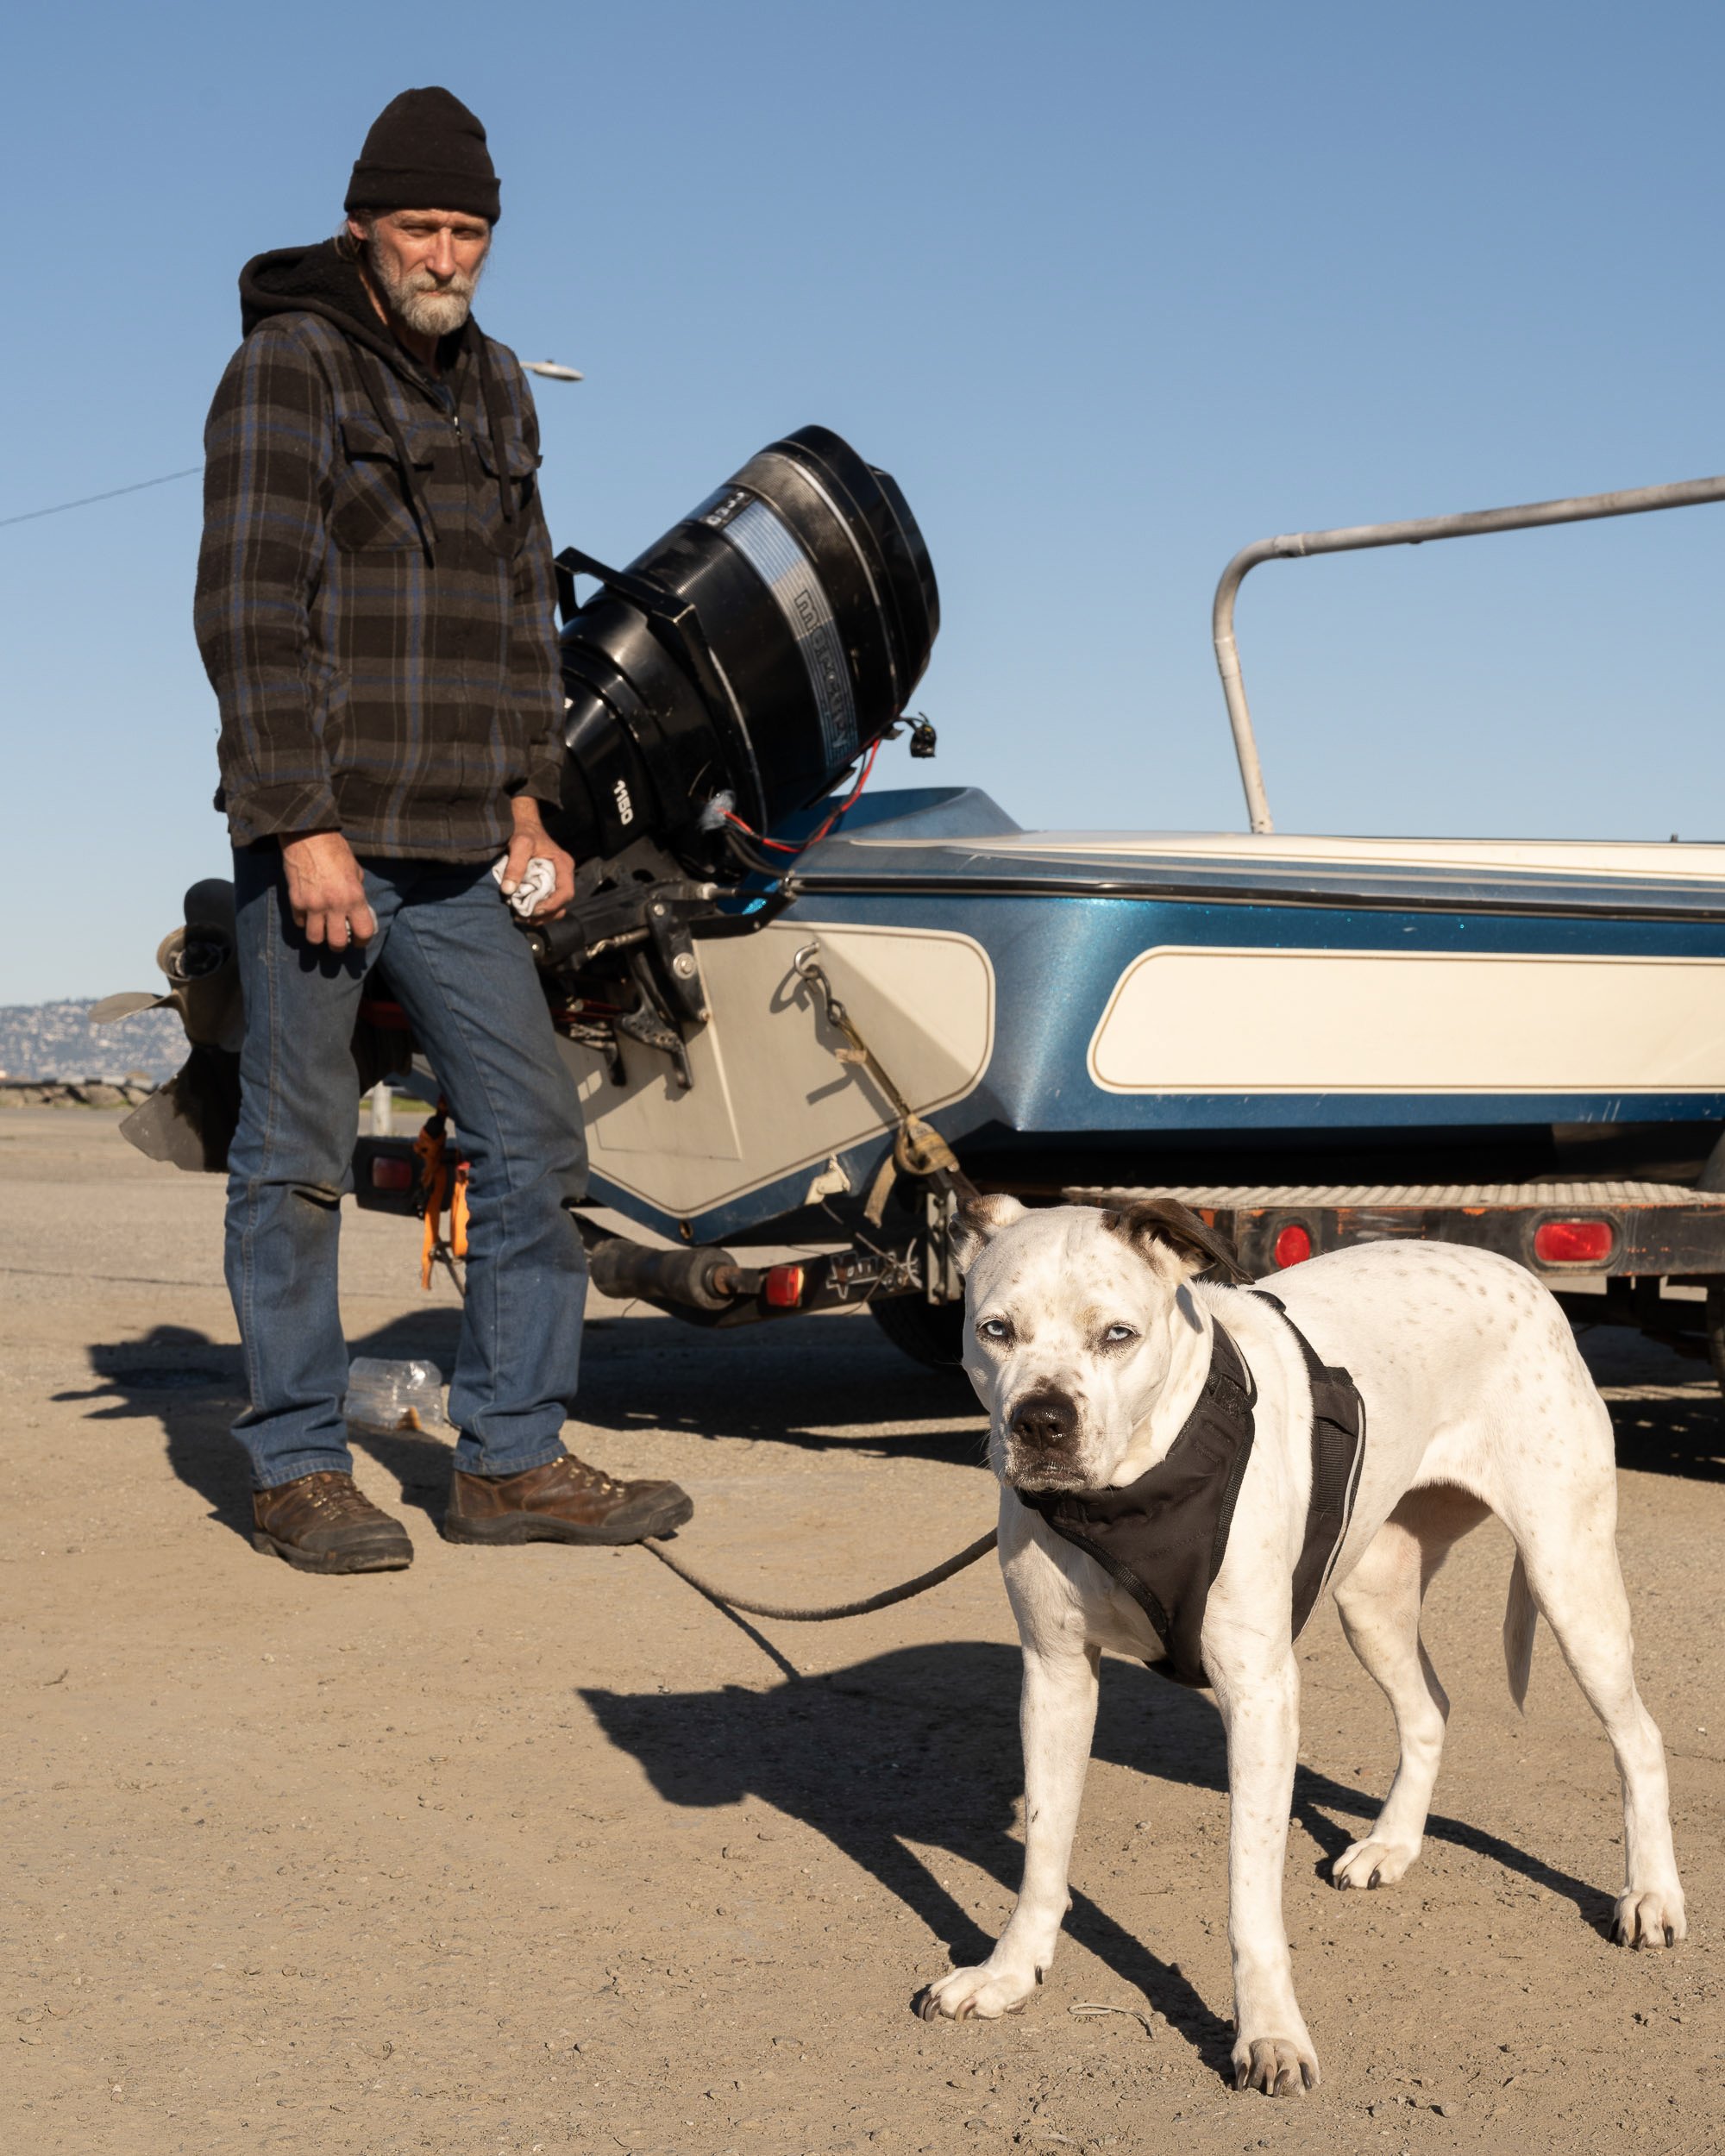   Kurt with his Dog and New Boat, 2022   